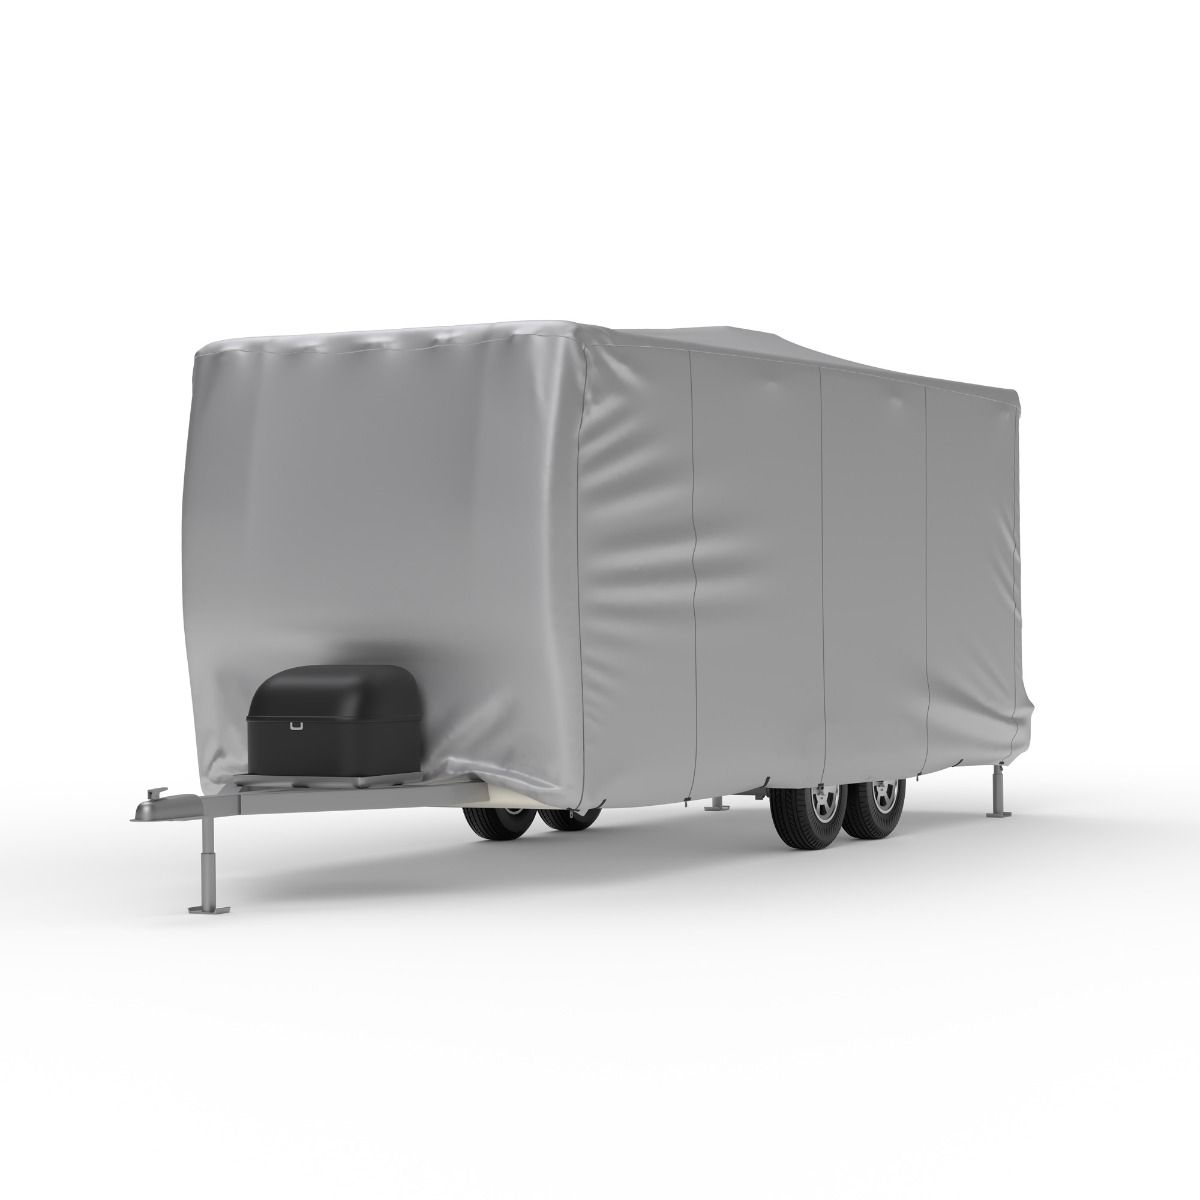 Platinum Shield Travel Trailer RV Cover (Fits 13.5' to 16' Long)